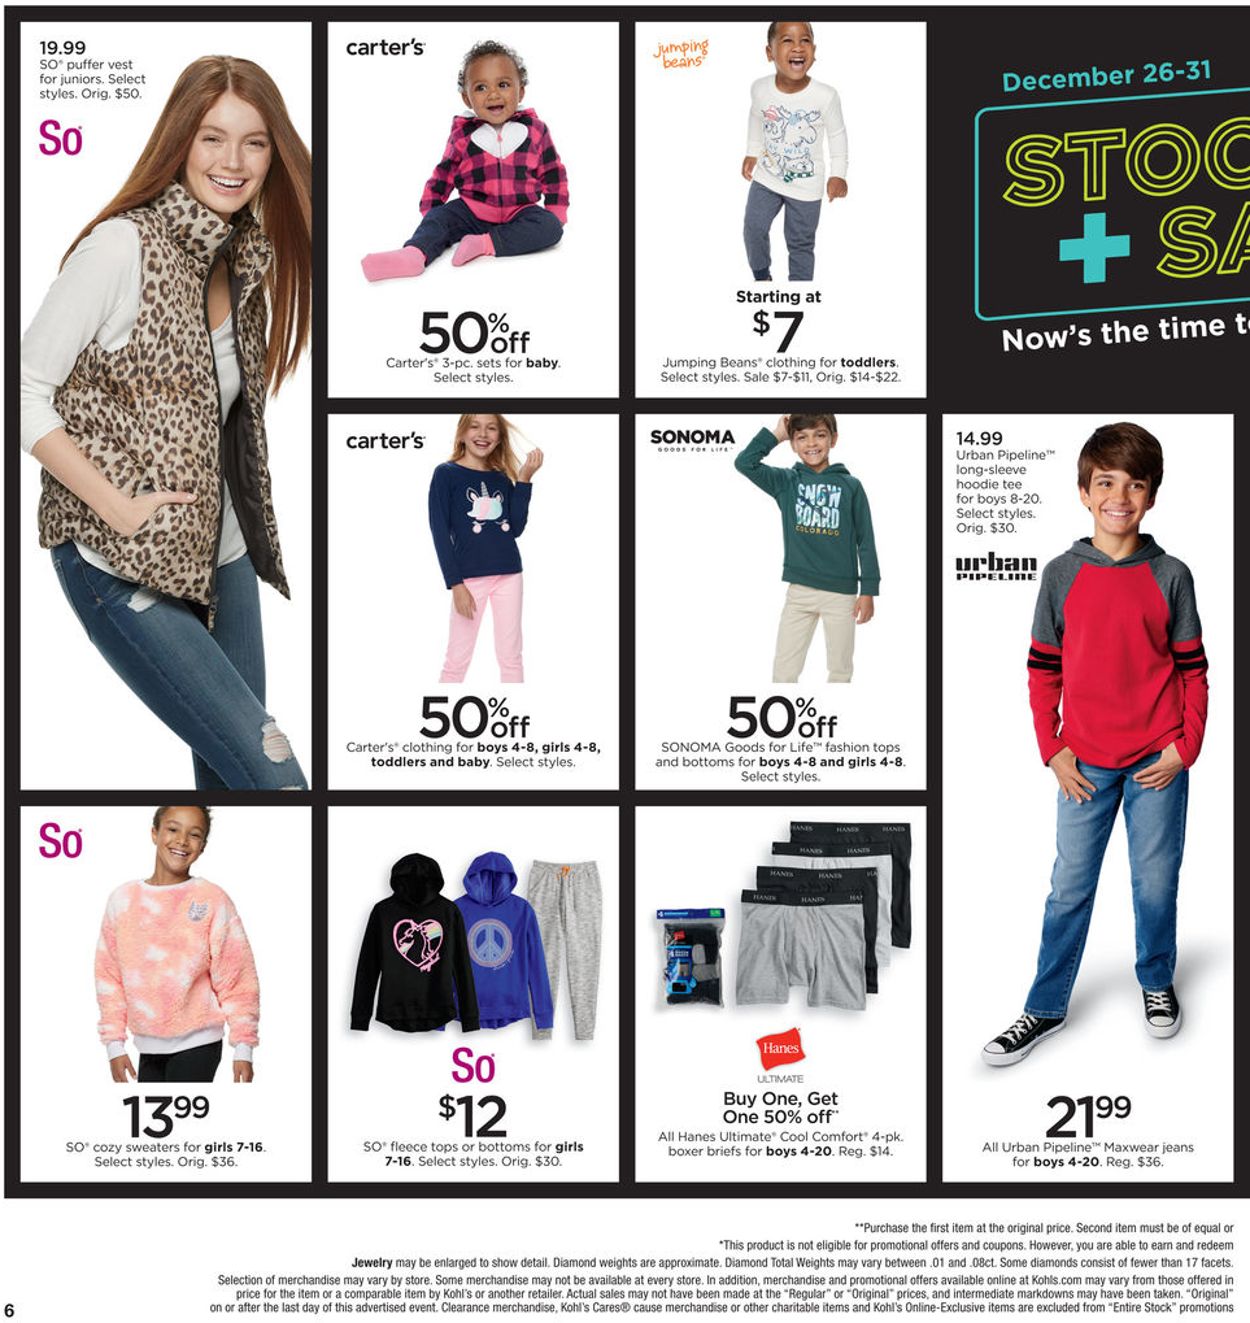 Kohl's Current weekly ad 12/26 - 12/31/2019 [6] - frequent-ads.com